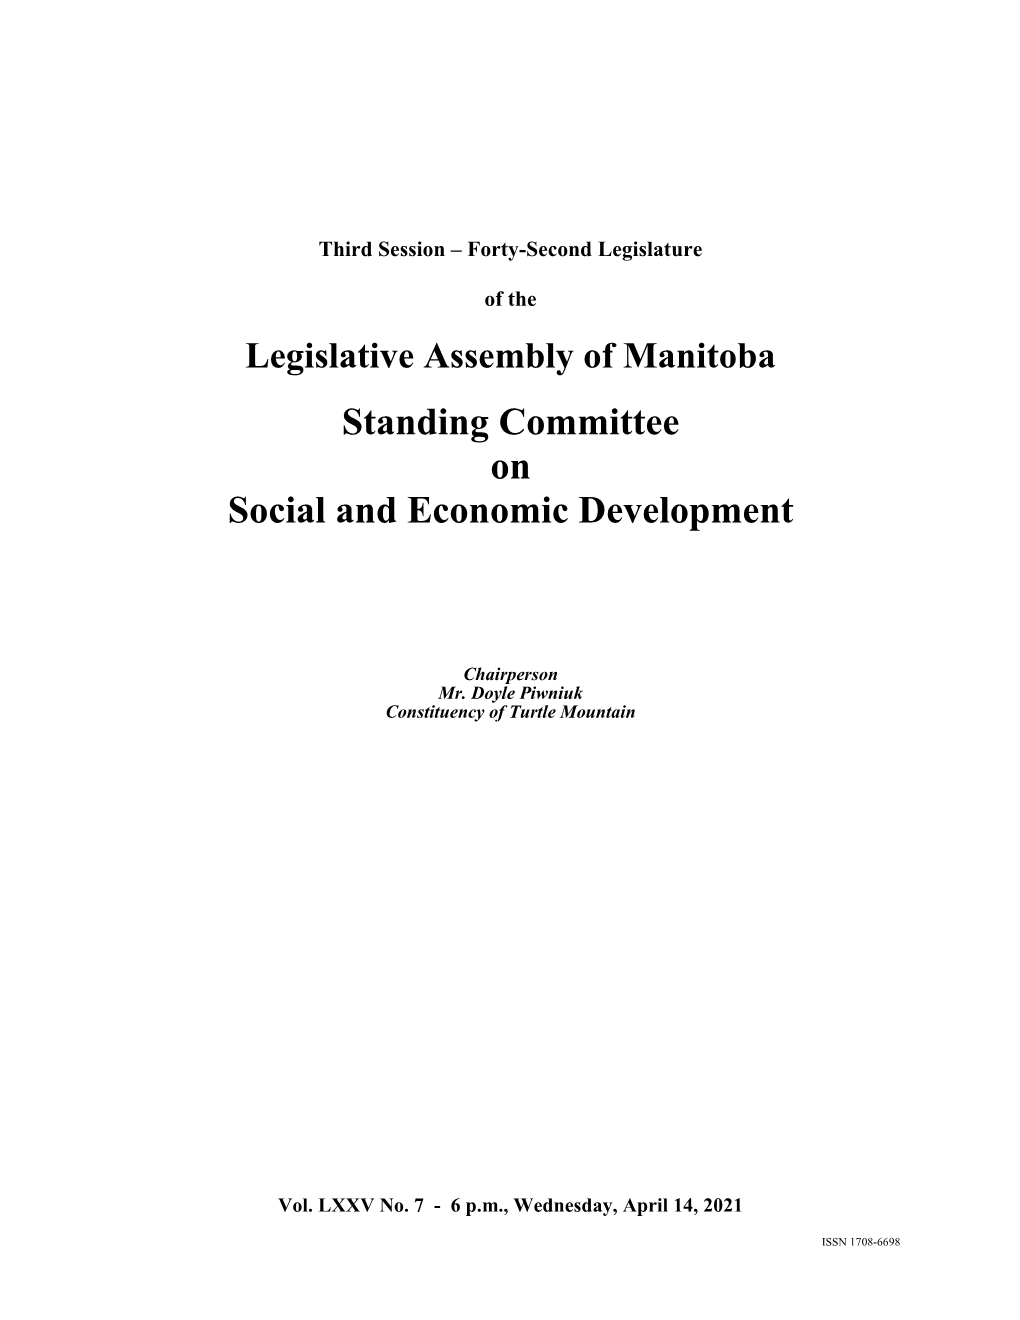 Legislative Assembly of Manitoba Standing Committee on Social And